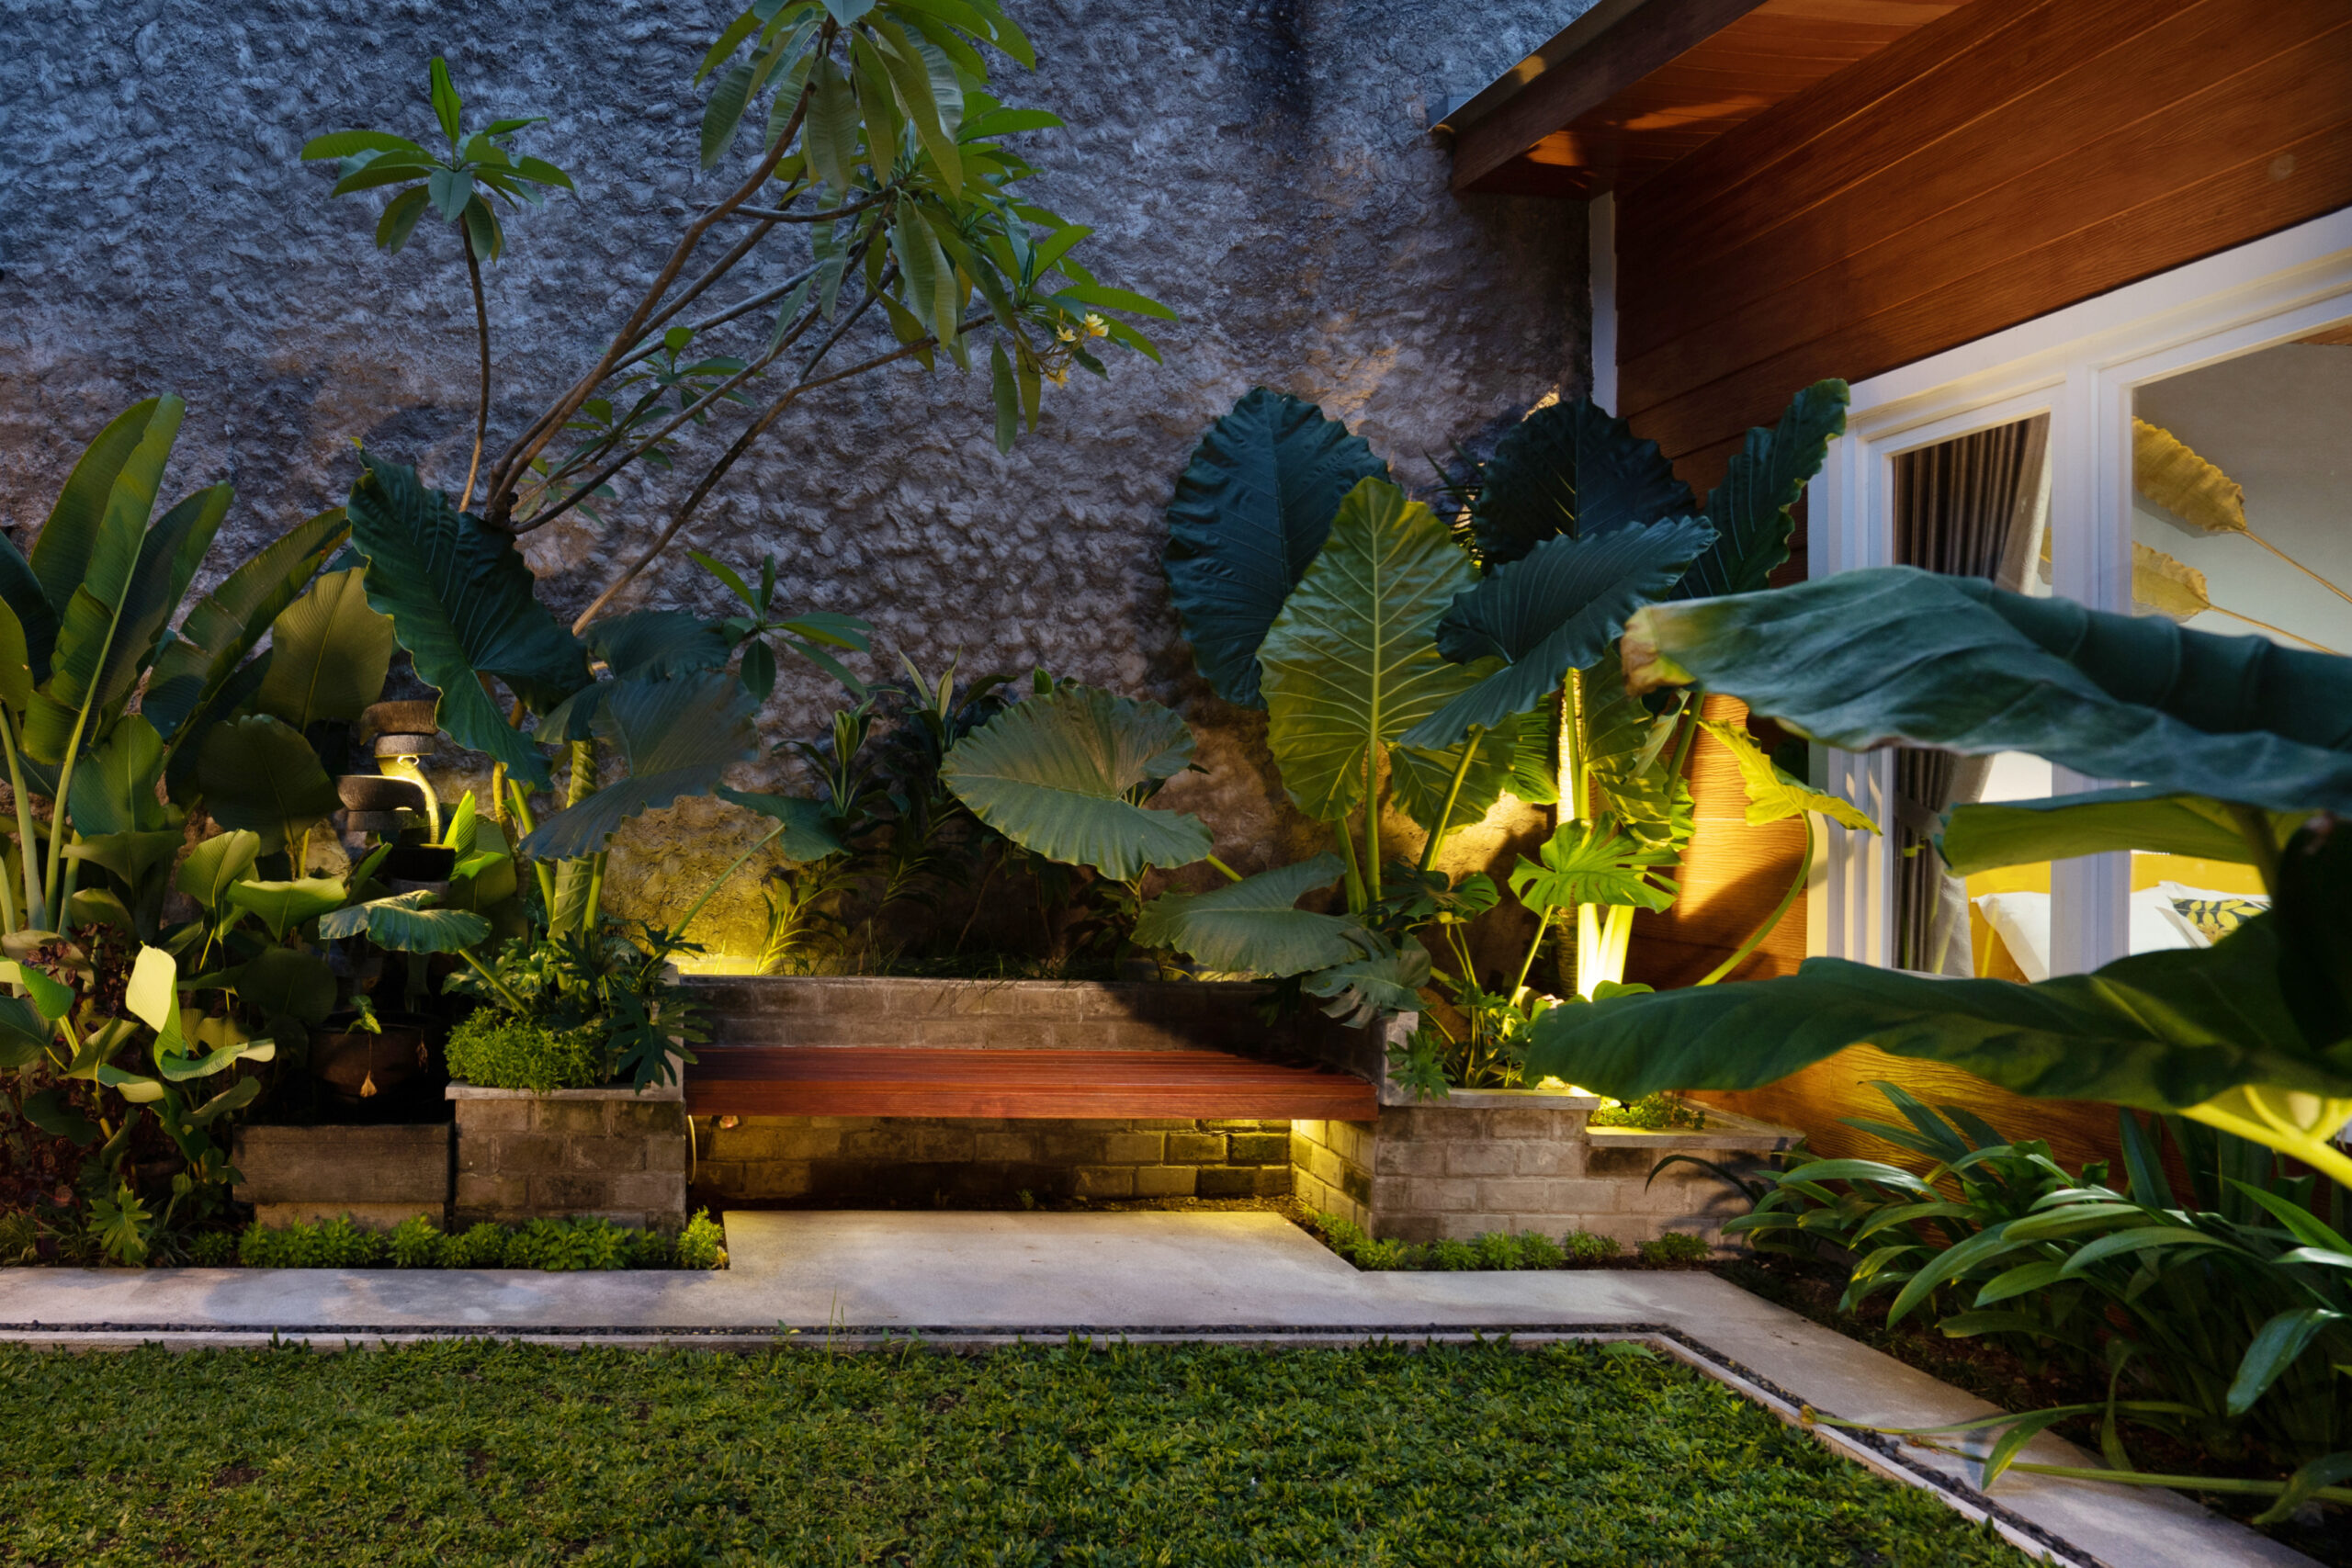 Tropical Backyard Garden at Night with Various of Plants